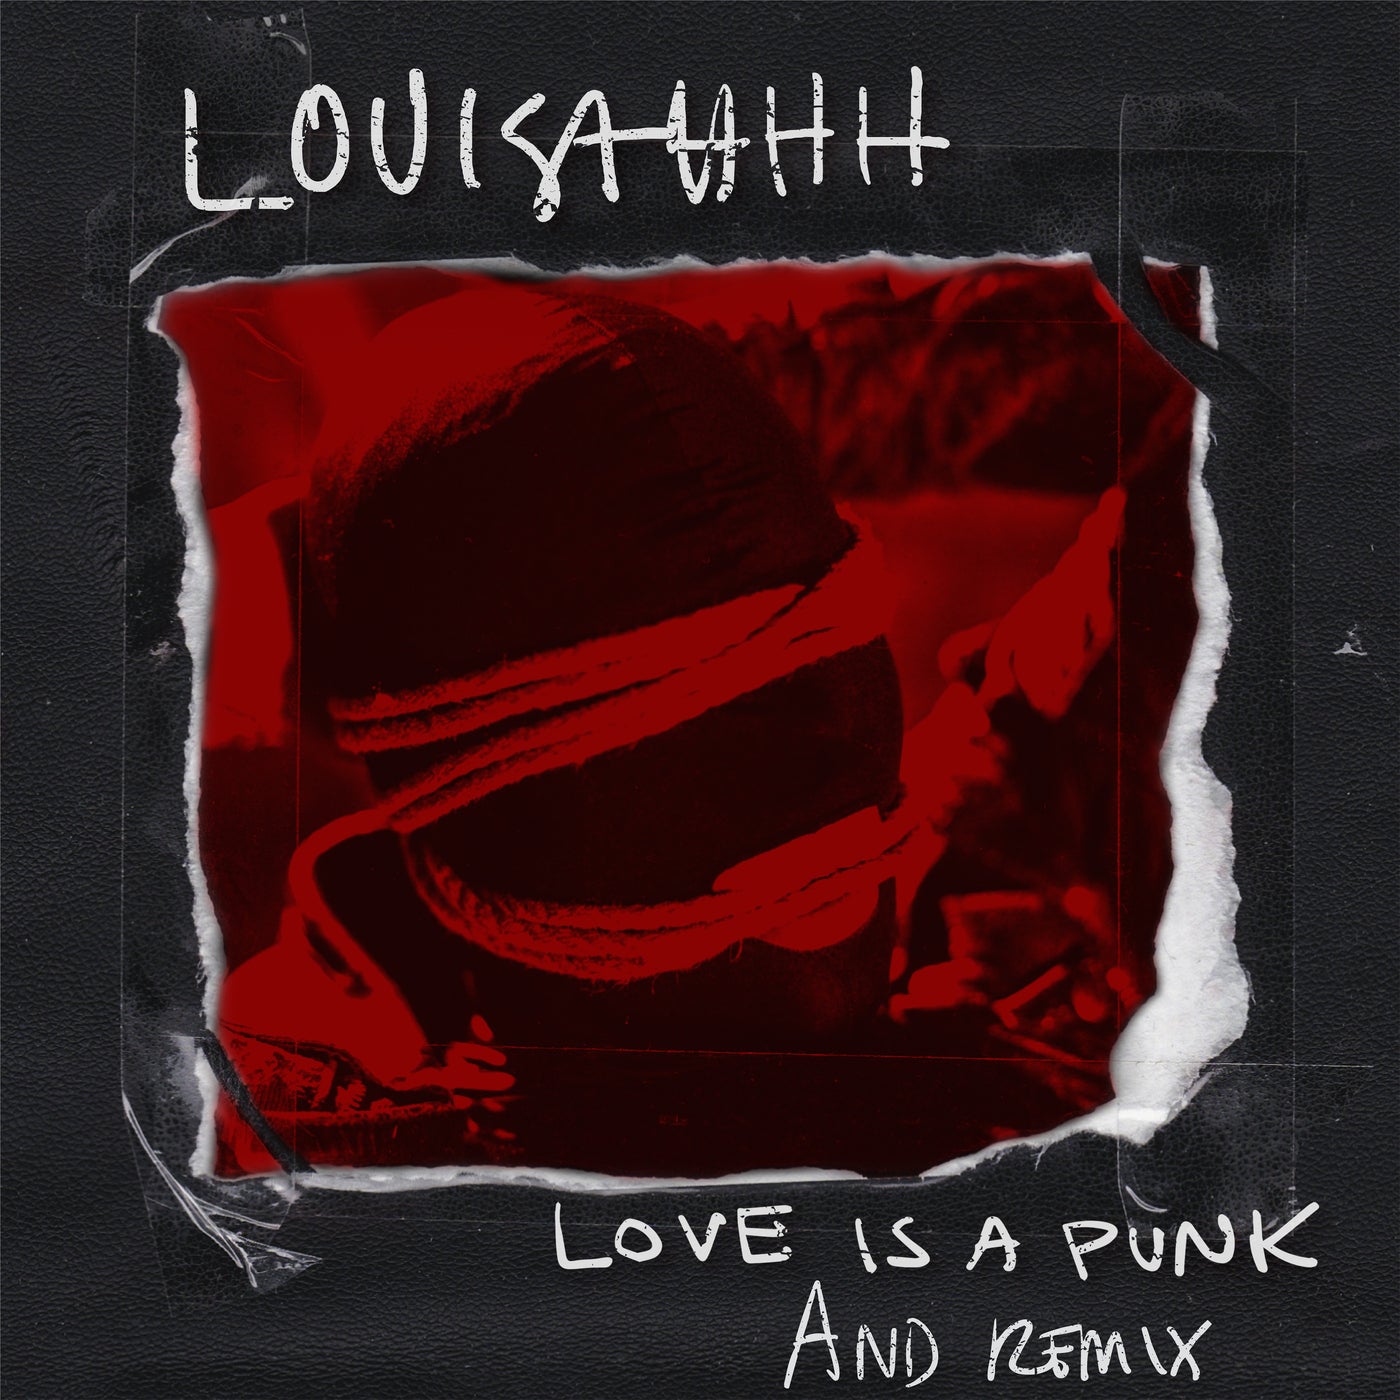 image cover: Louisahhh - Love Is a Punk (AnD Remix) / 4050538683486